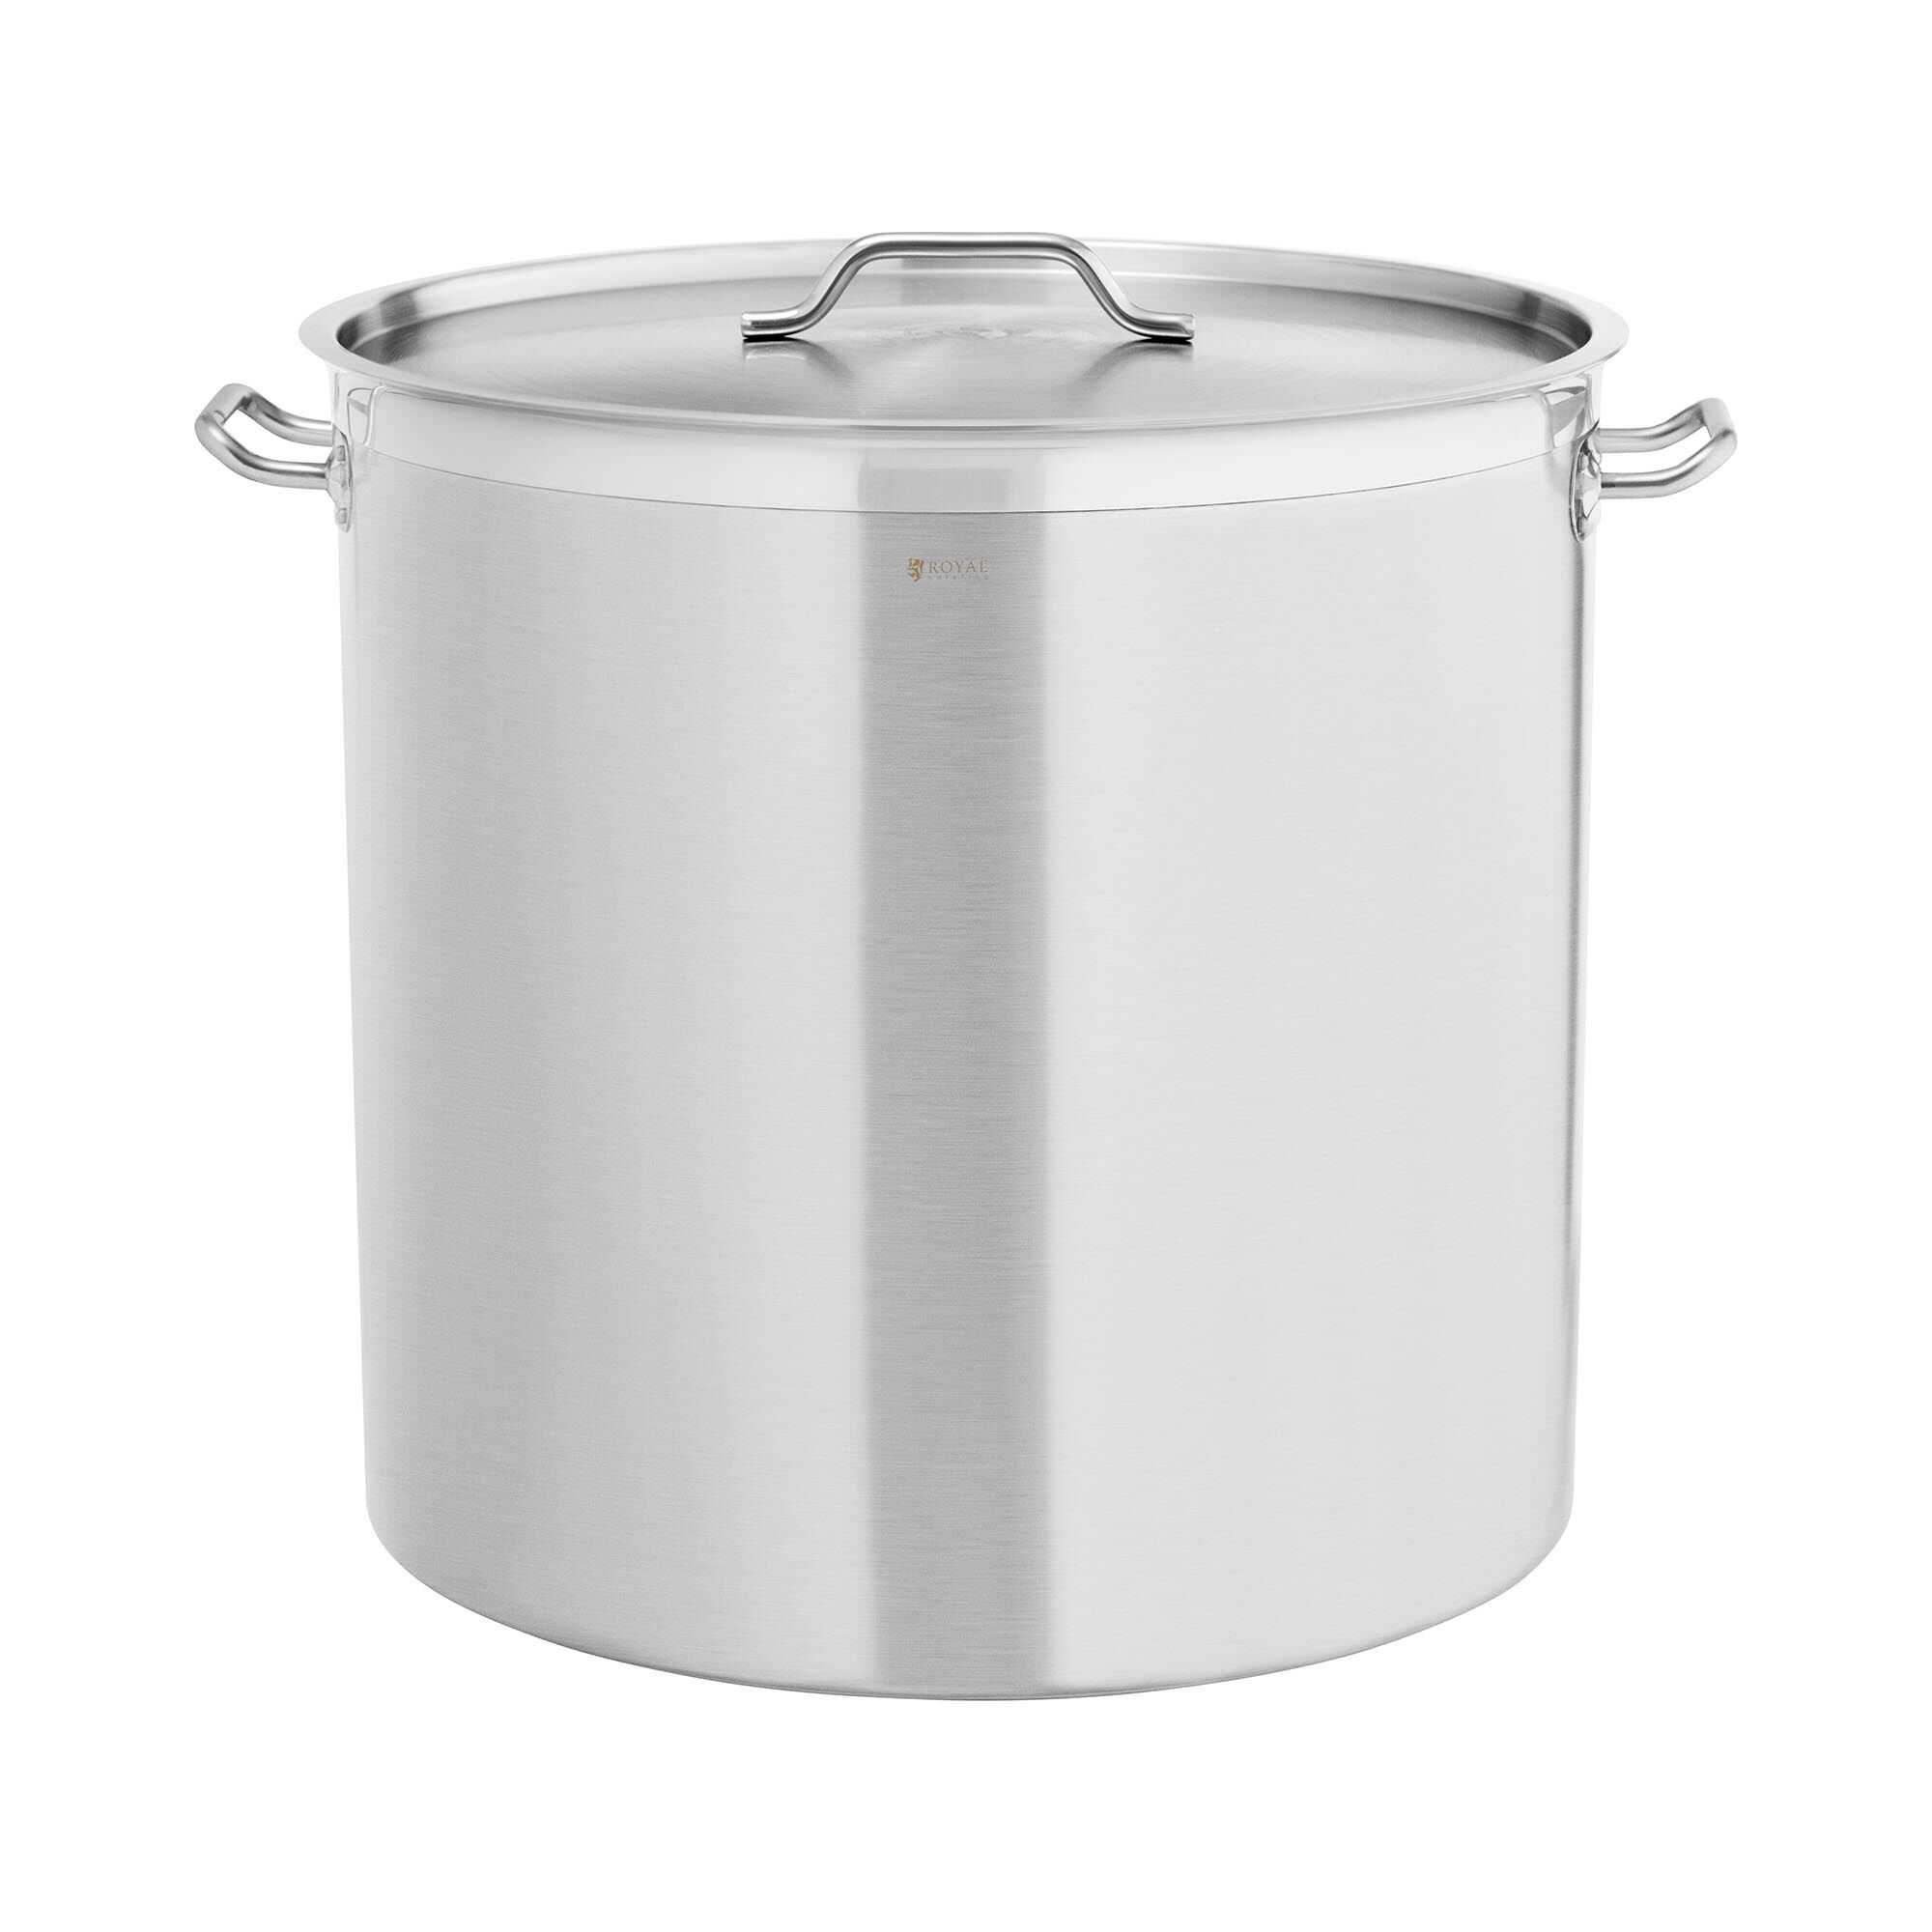 Royal Catering Induction Cooking Pot - 170 L - Royal Catering